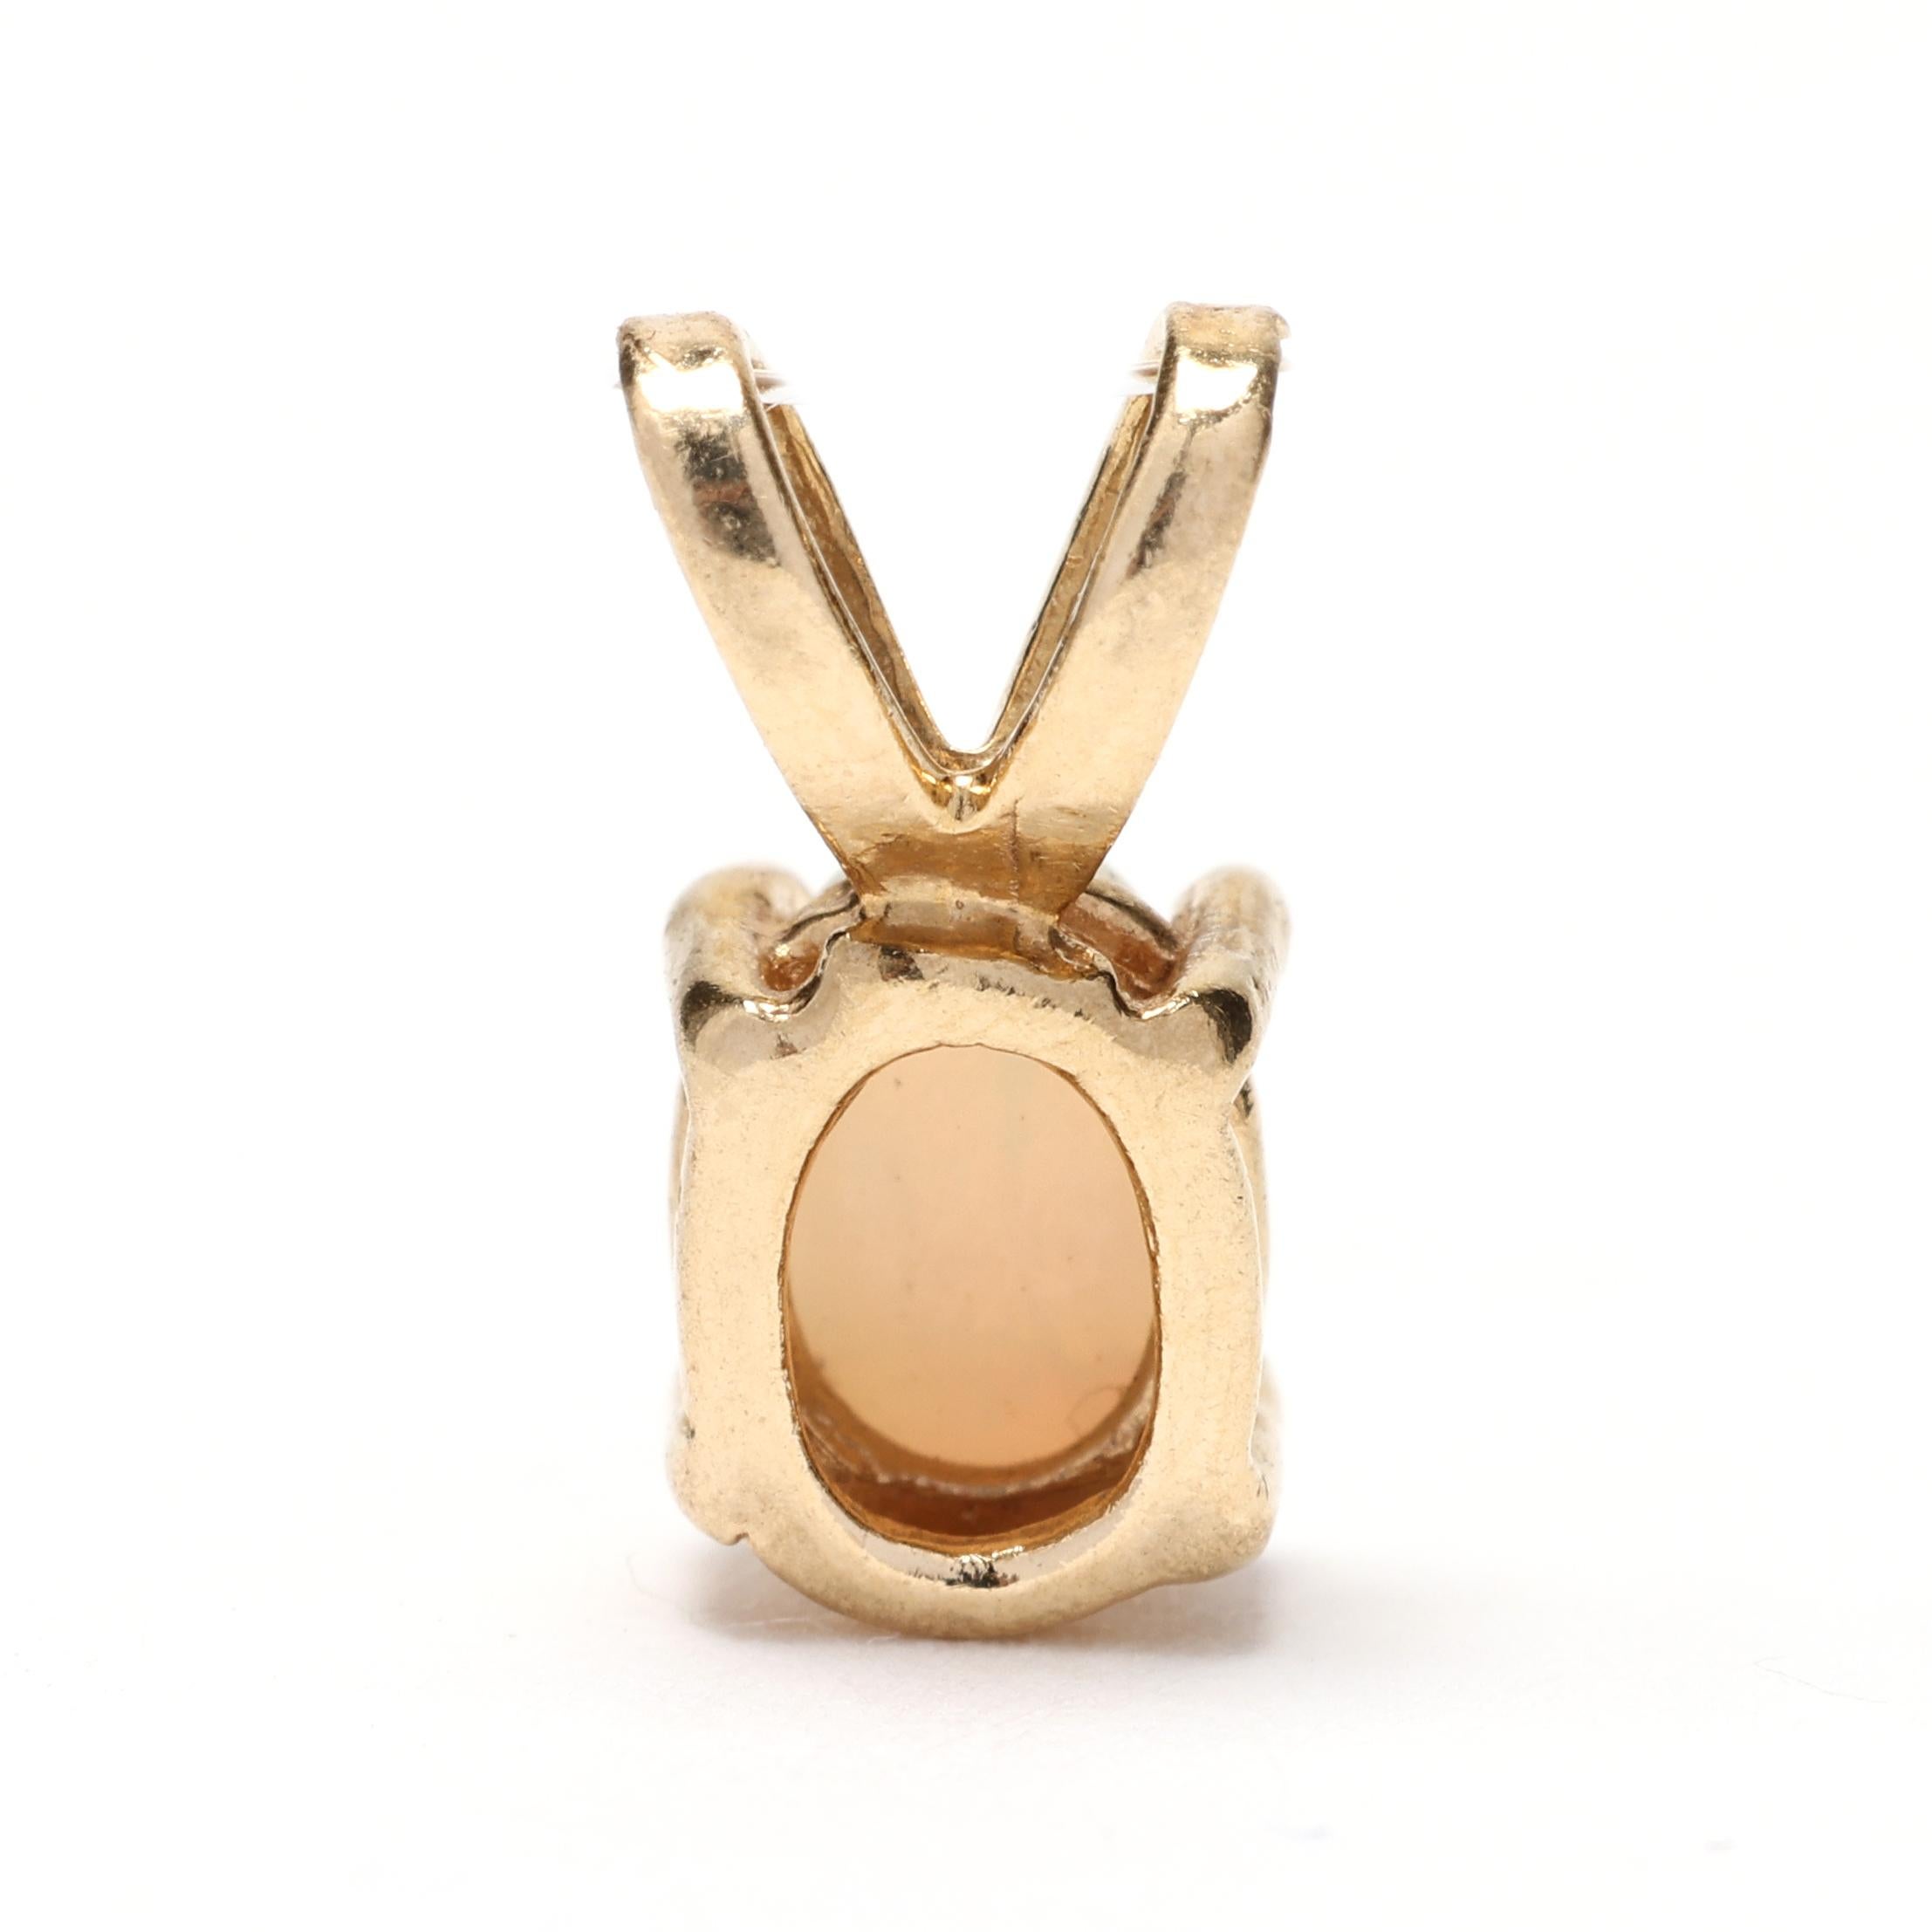 This delicate mini opal charm is crafted from 14k yellow gold, making it a beautiful and elegant addition to any jewelry collection. The small and dainty design of this pendant charm is perfect for adding a touch of sparkle to any outfit. This teeny